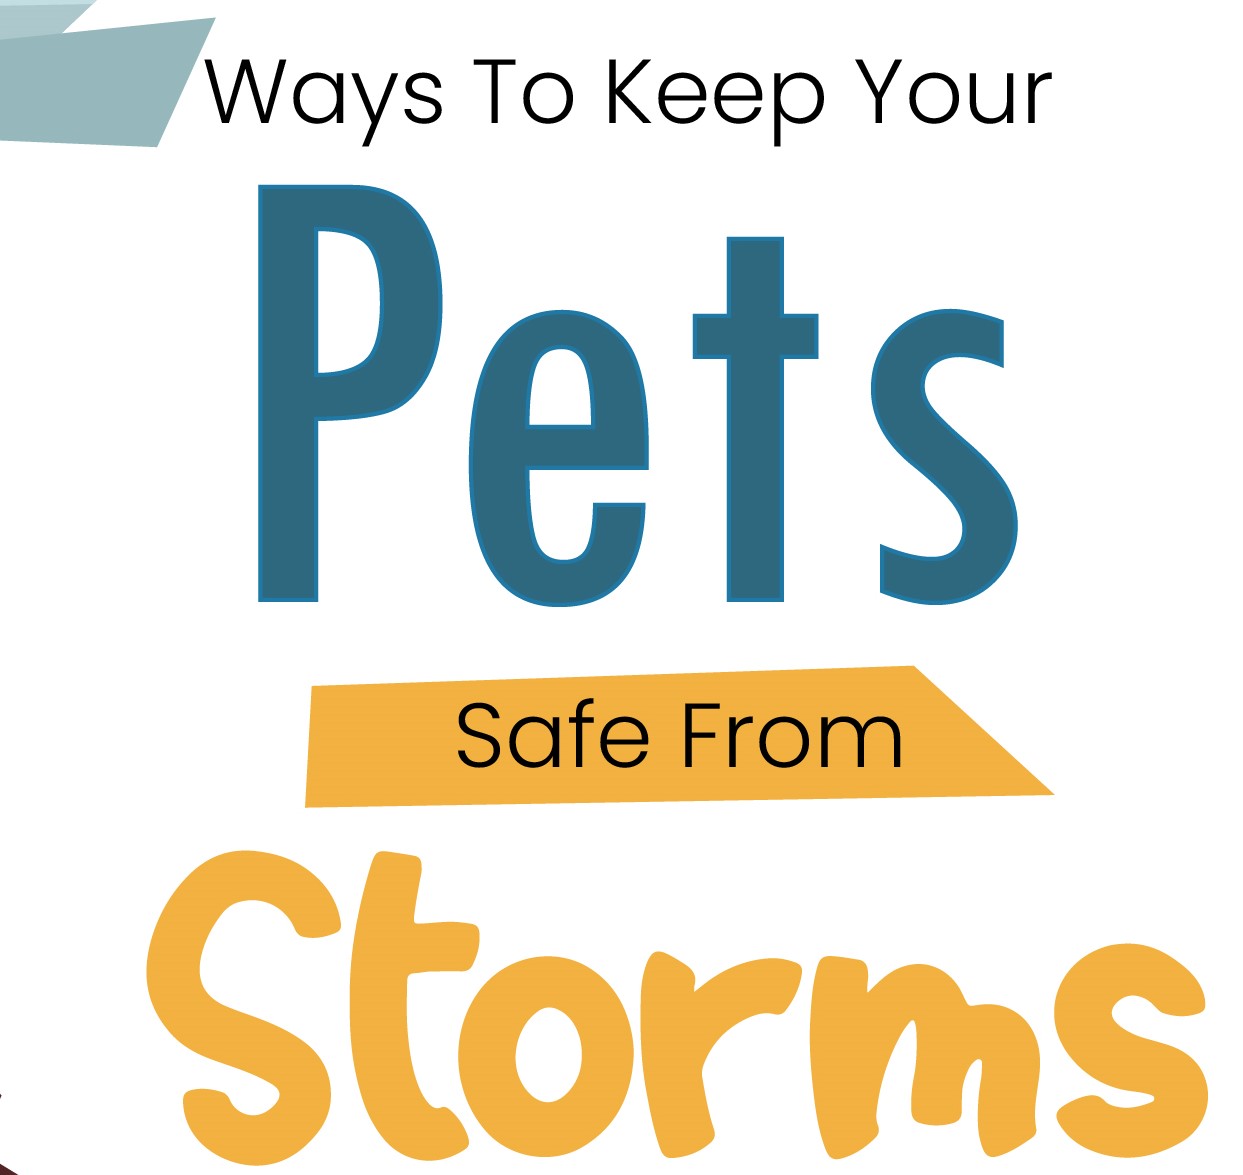 Ways to Keep your Pets Safe from Storms